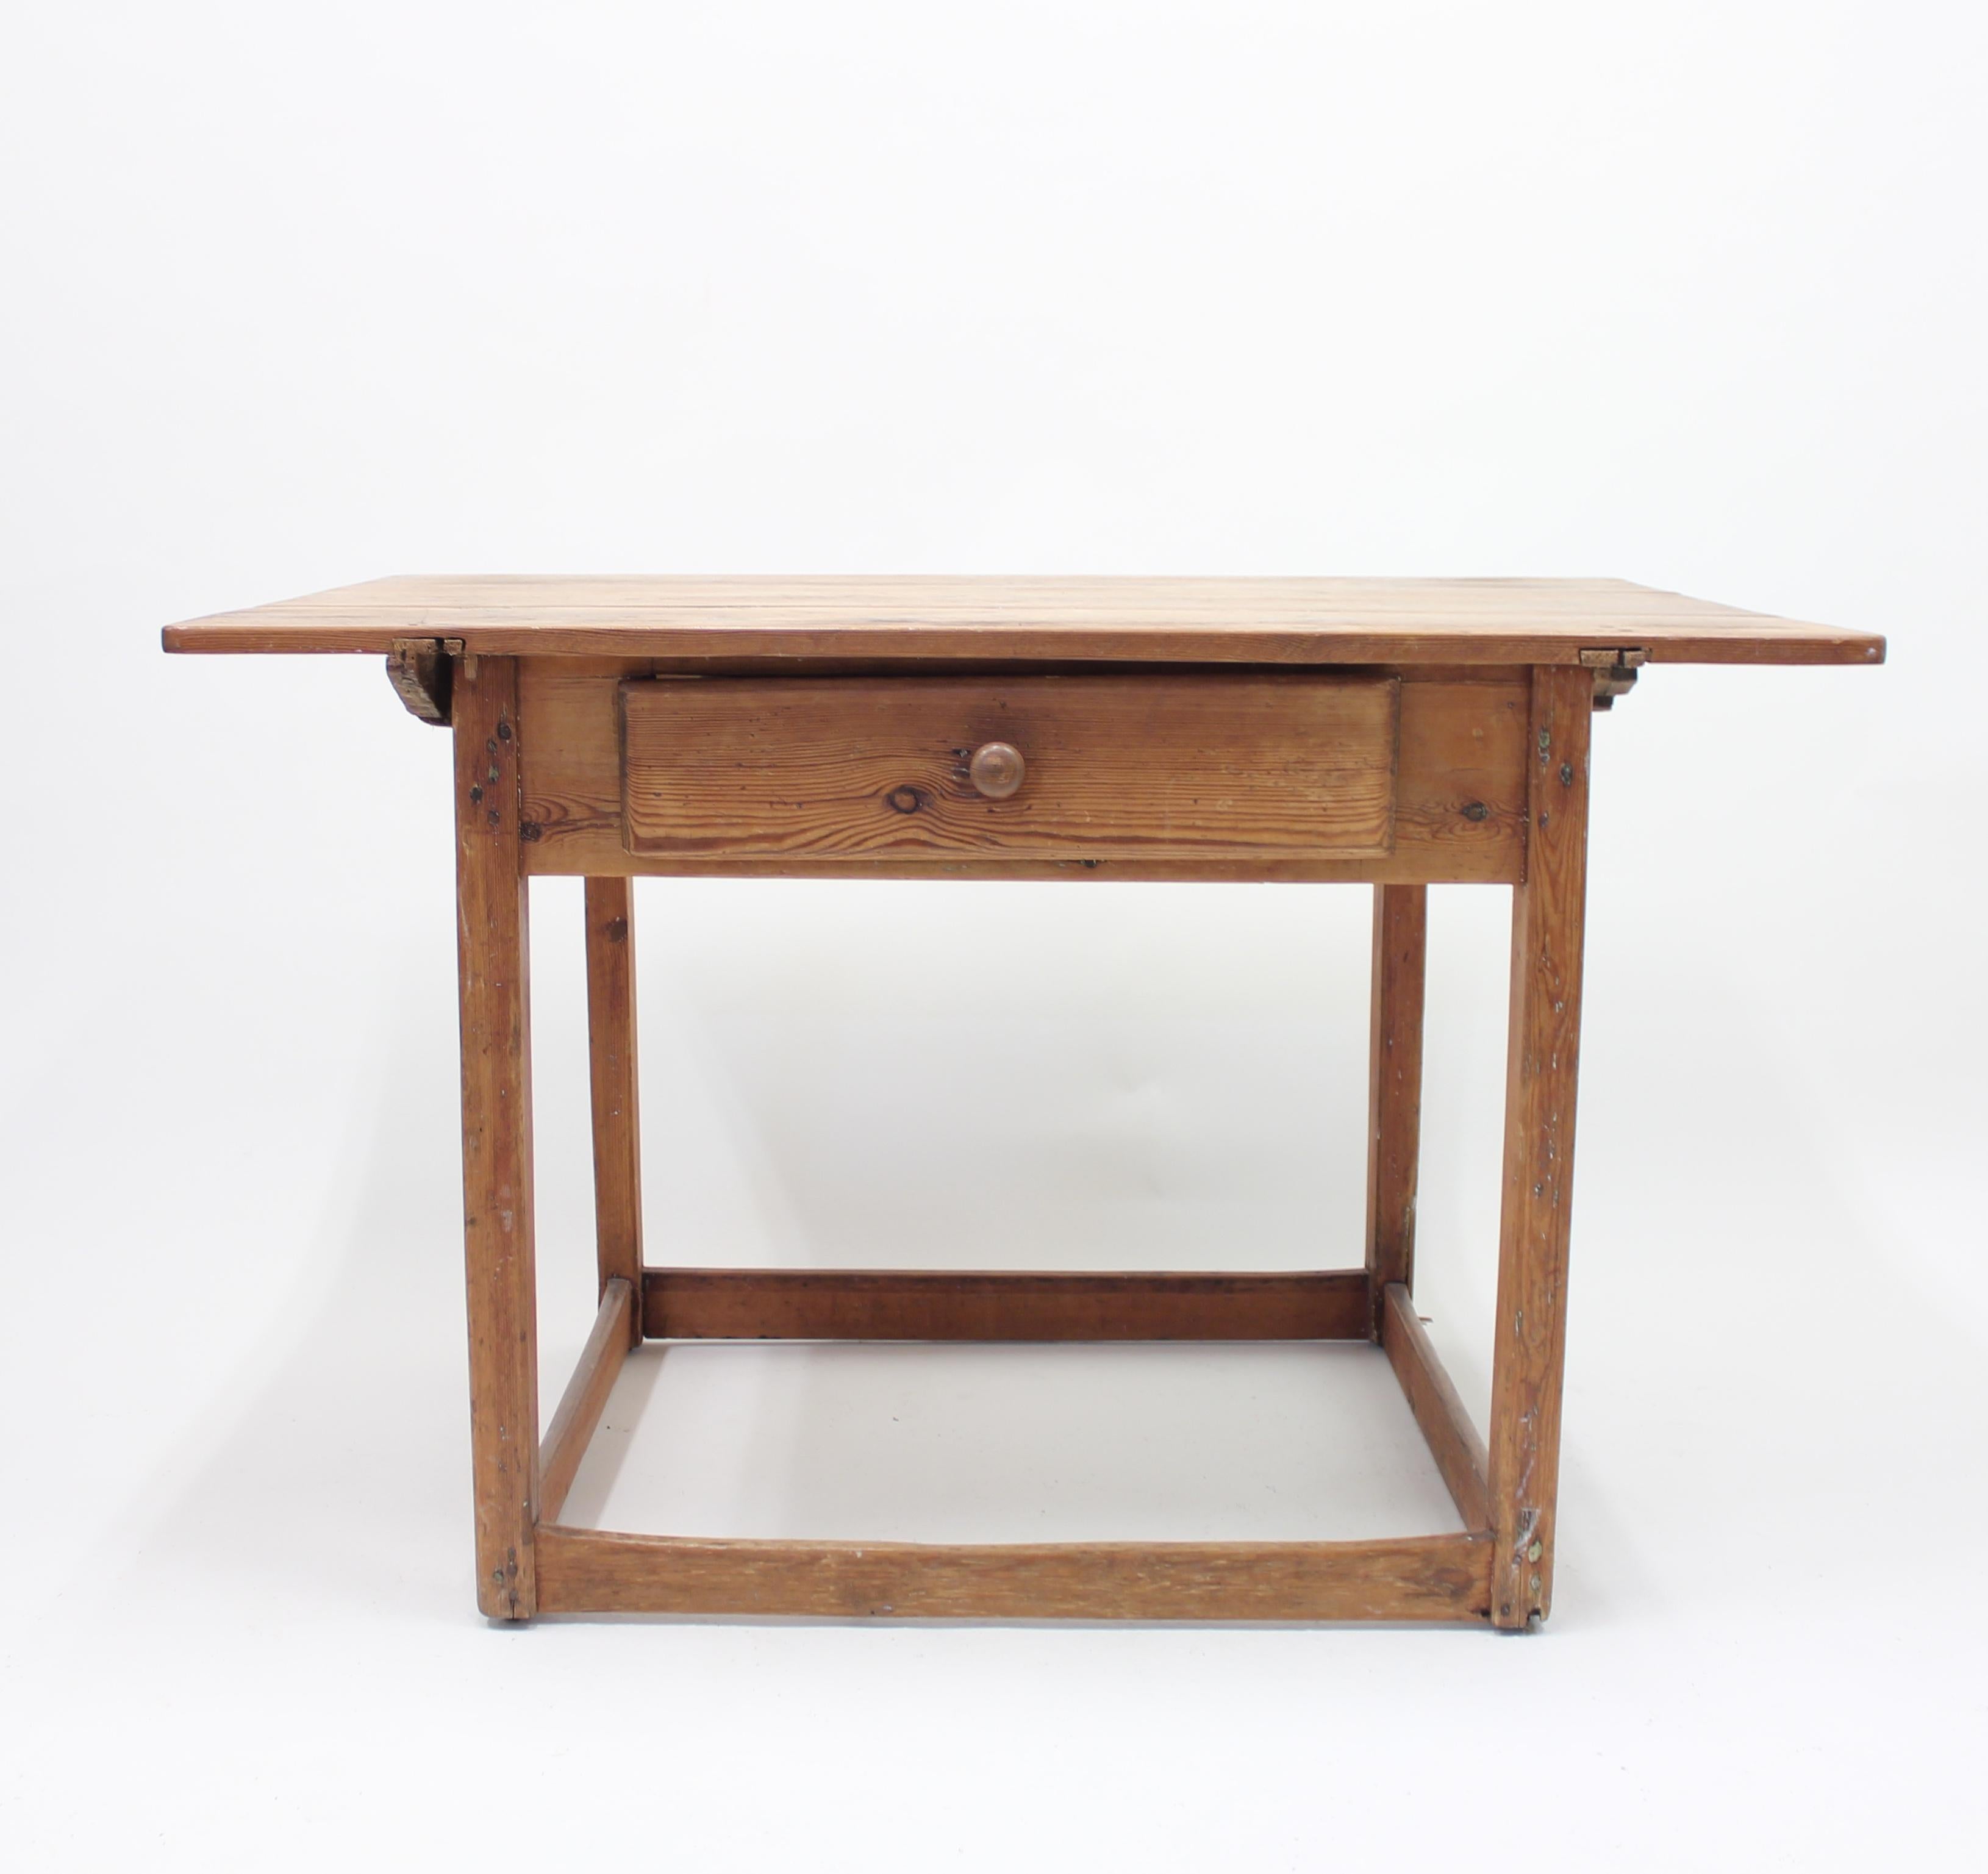 Antique Swedish rustic pine table that originates from the town Härnösand in the northern parts of Sweden. Made circa 1850 or slightly earlier. It features a removable three plank tabletop and a drawer on one side. The model will be perfect as a